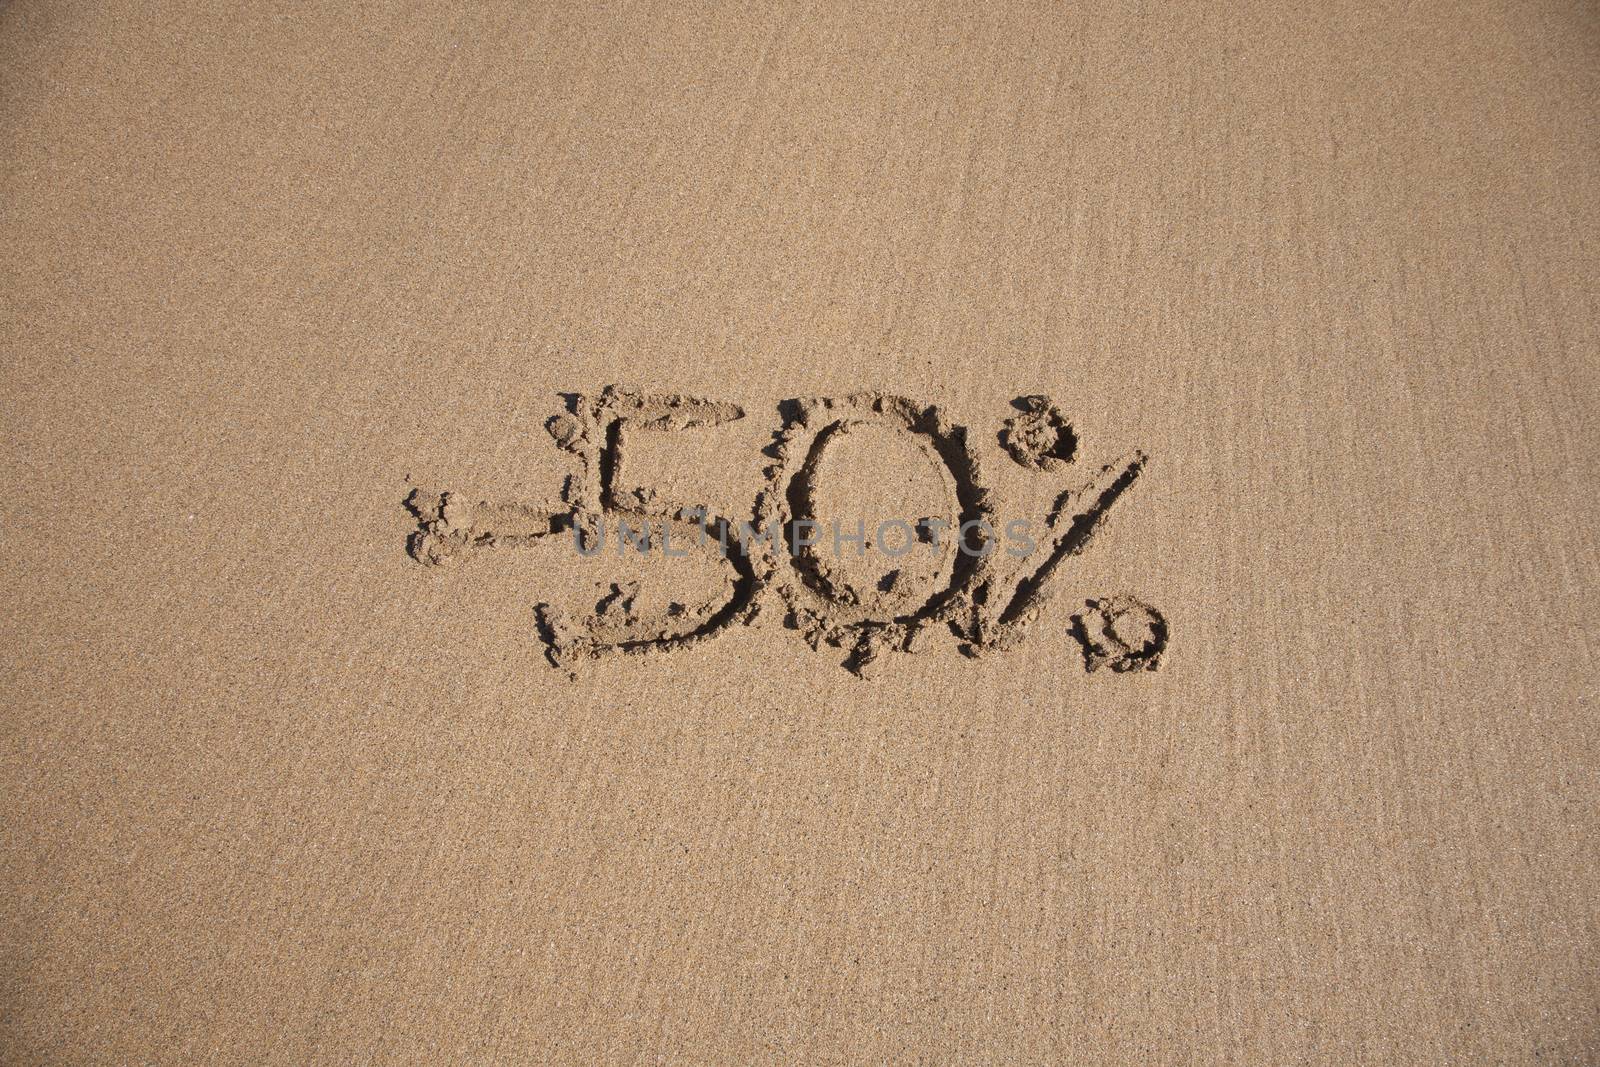 50 percent discount in earth text written on brown sand ground low tide beach ocean seashore in Spain Europe